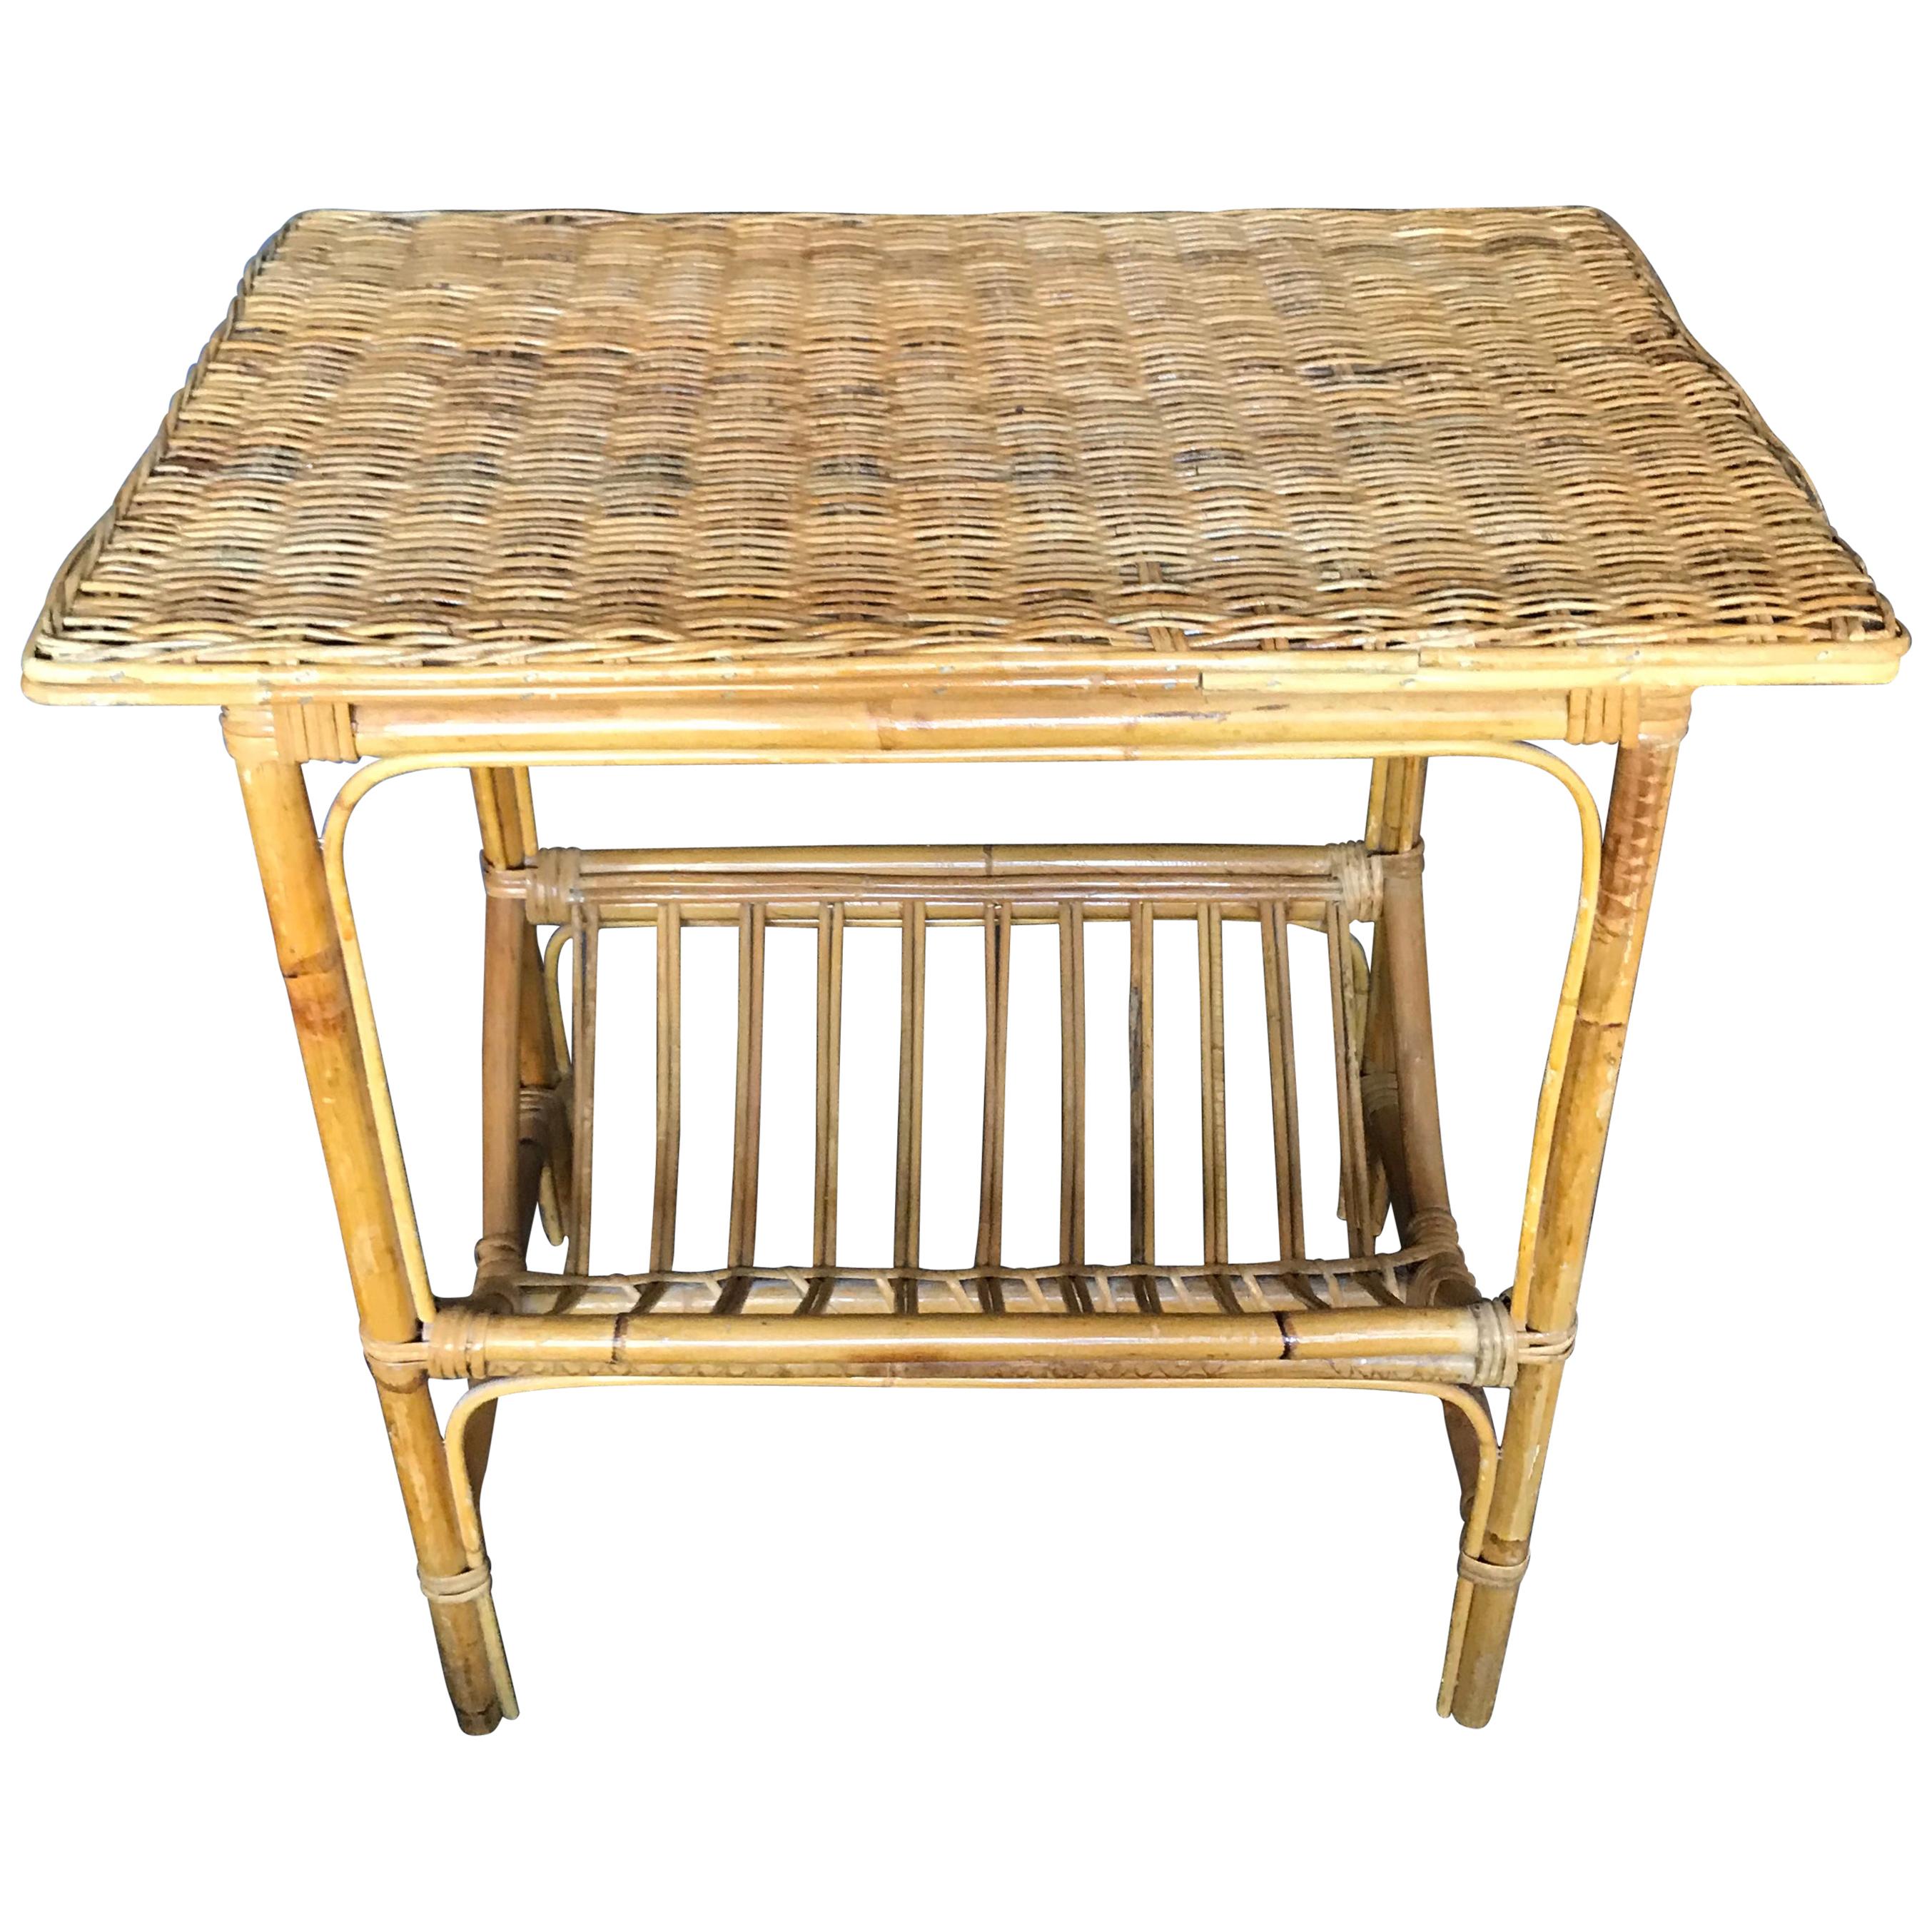 Wicker and Bamboo Side Table